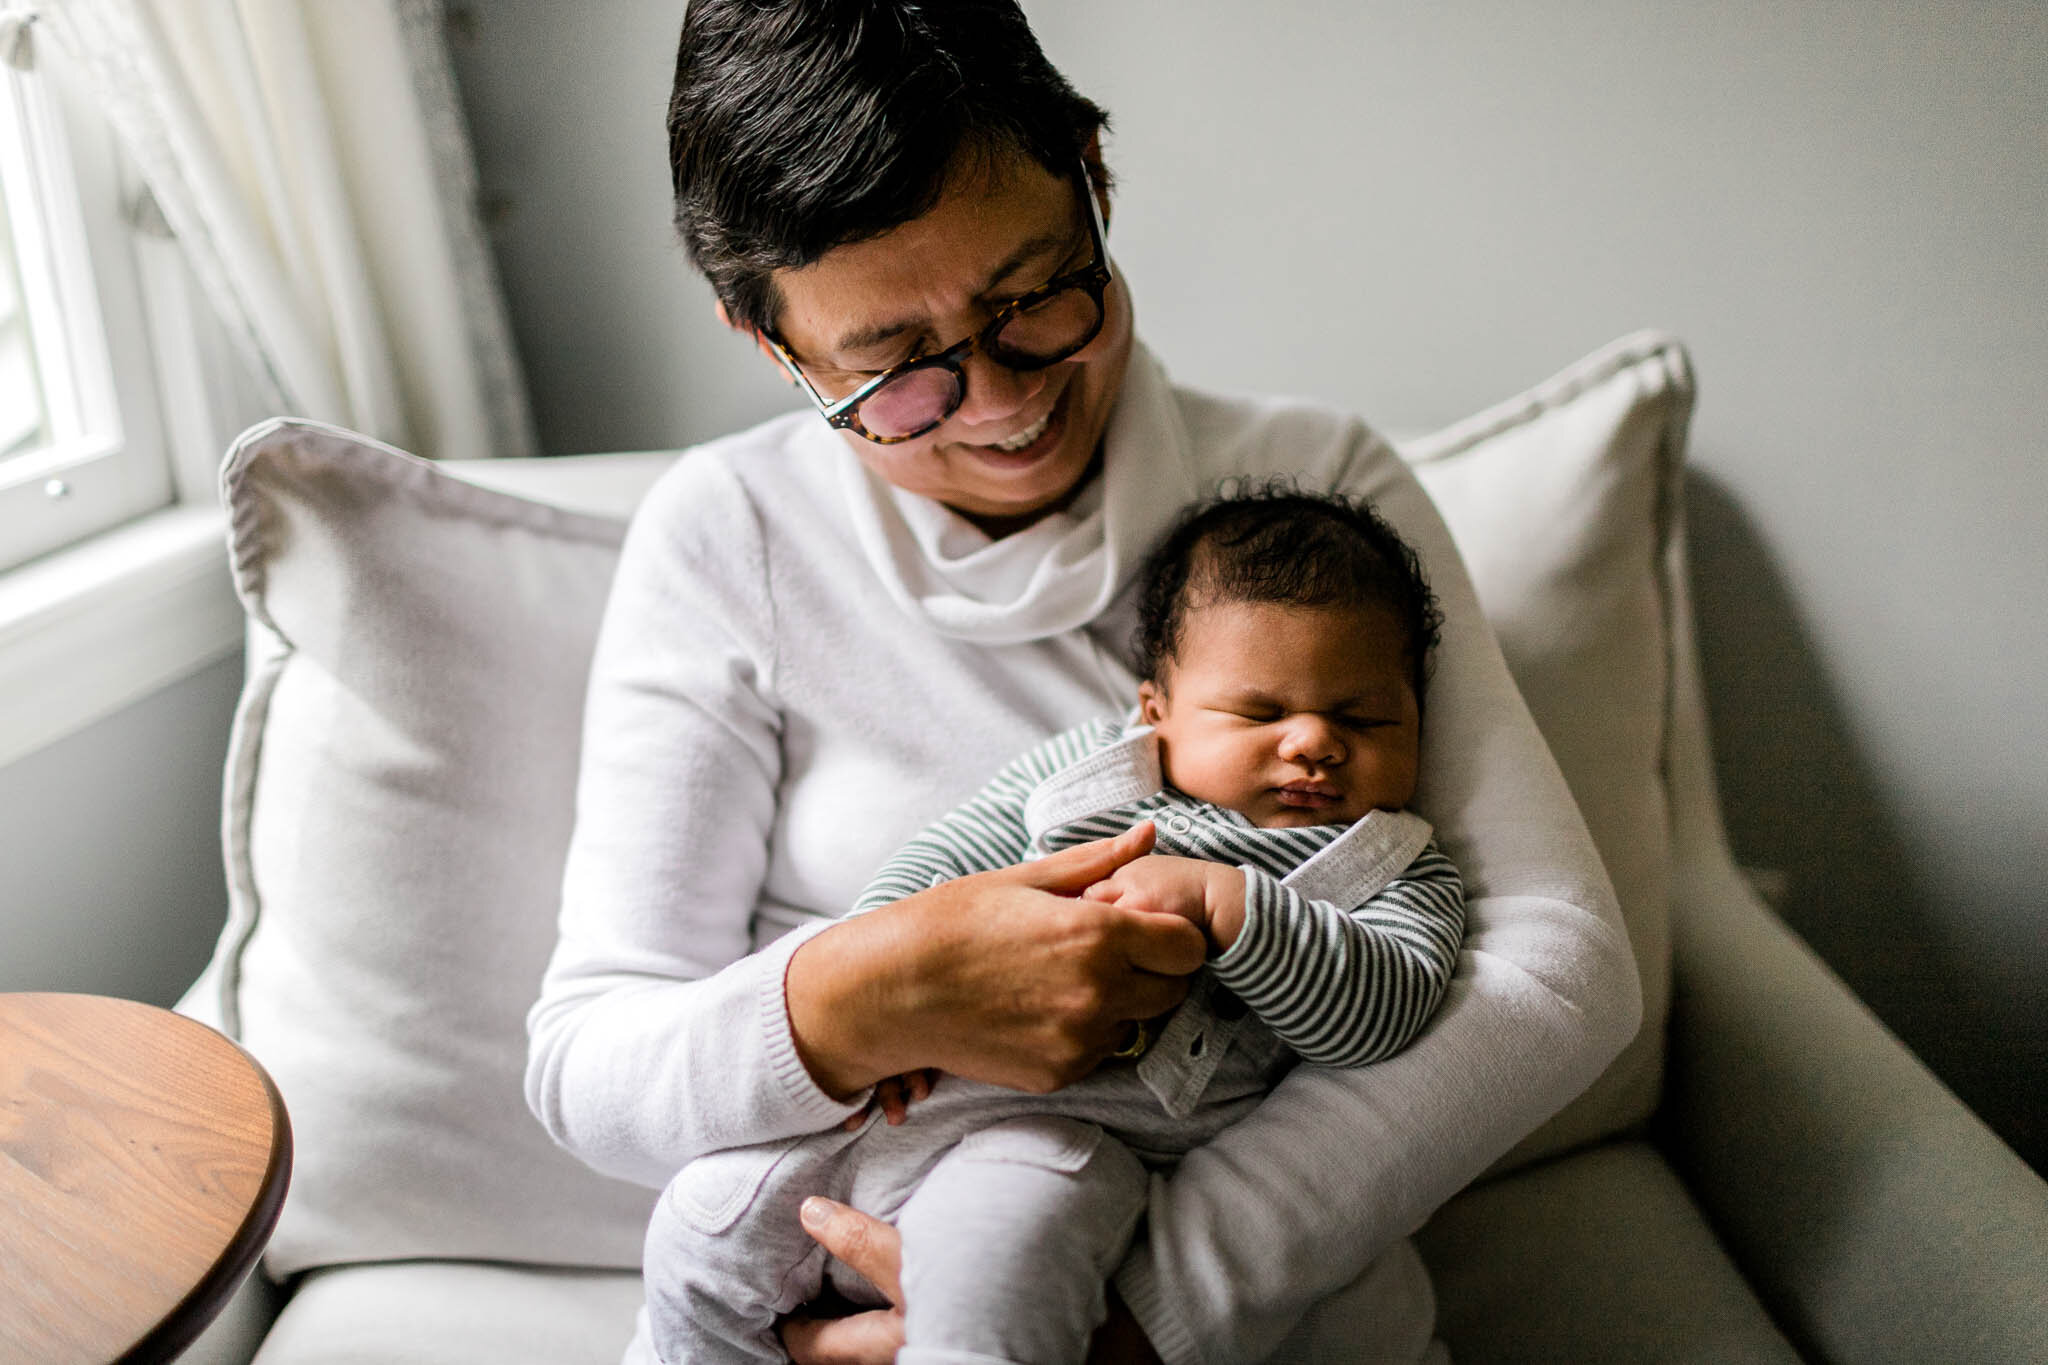 Durham Newborn Photographer | By G. Lin Photography | Grandma holding grandson on couch